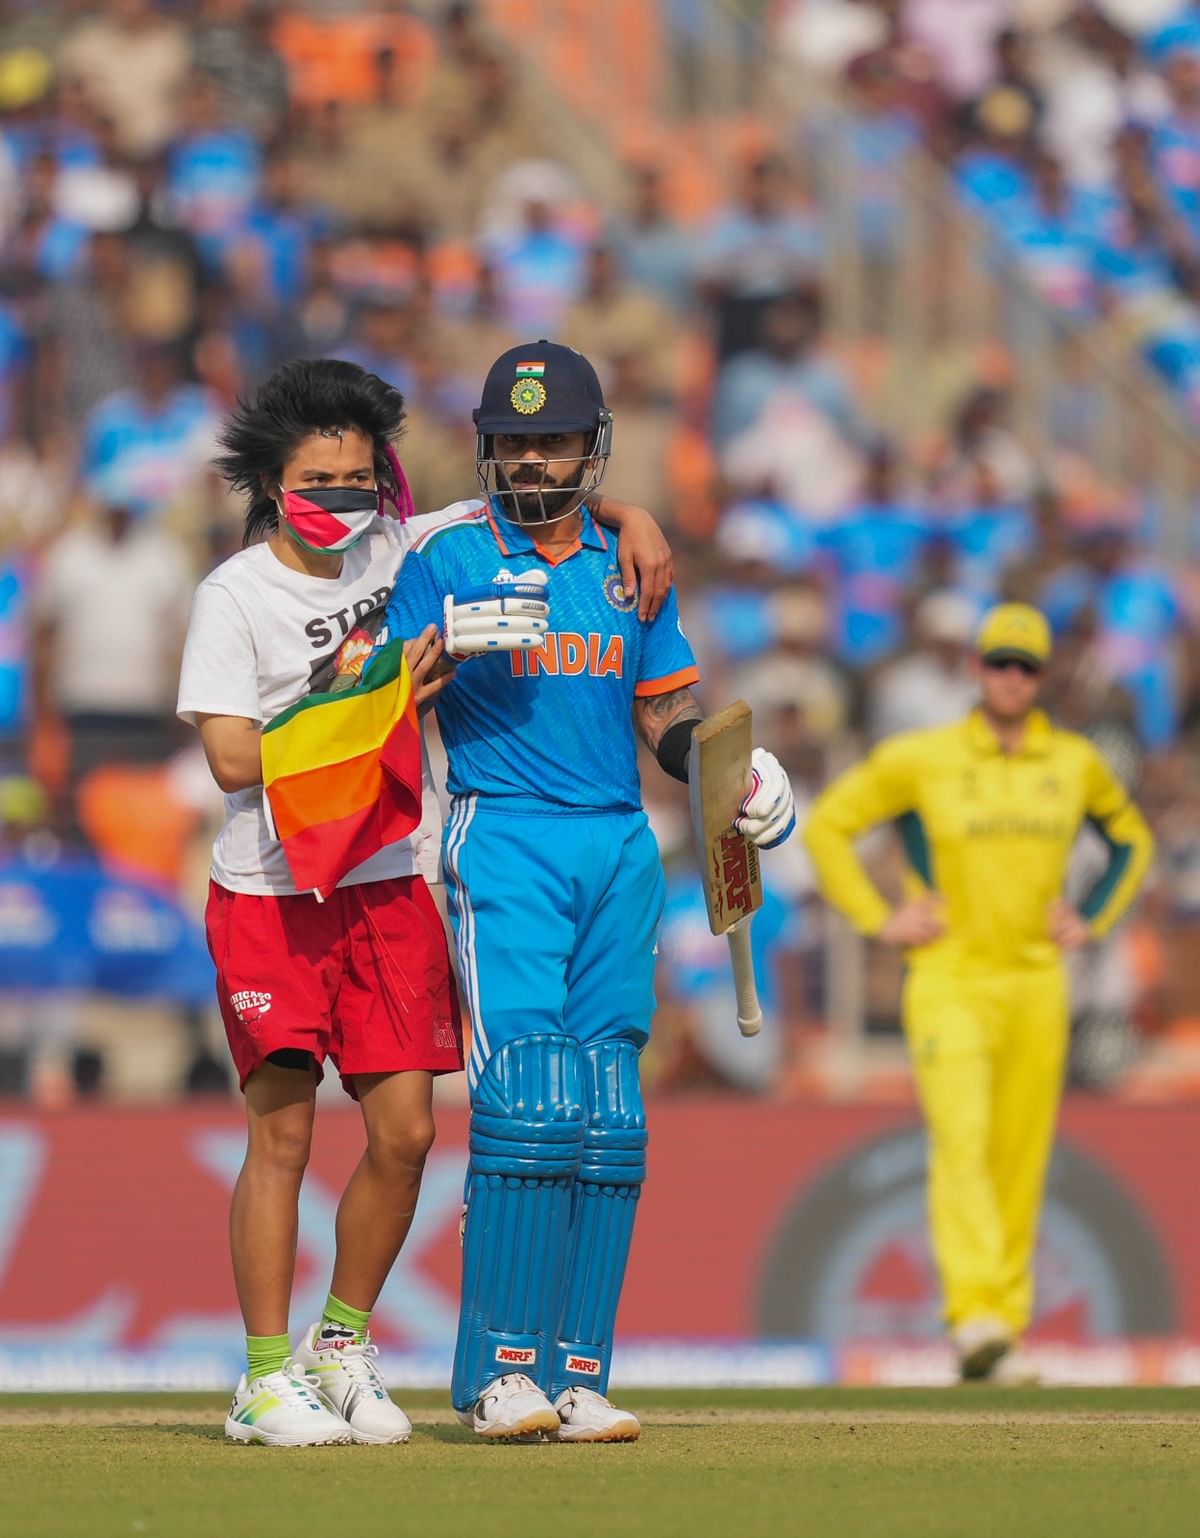 The man was seen trying to hug Virat Kohli – who was one of the batsmen on the pitch.